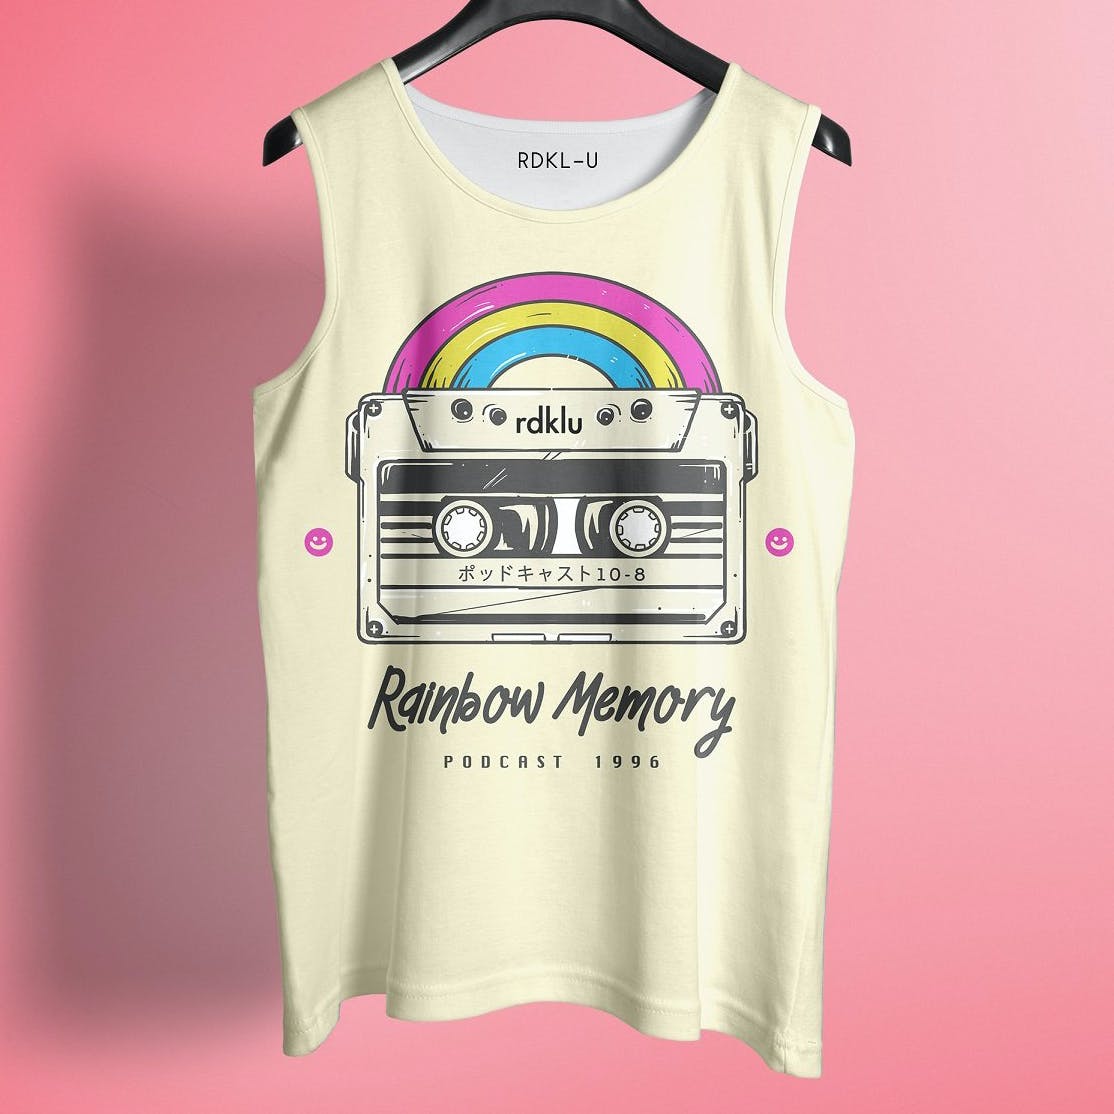 Clothing,White,Sleeveless shirt,T-shirt,Pink,Font,Top,Outerwear,Vest,Sleeve